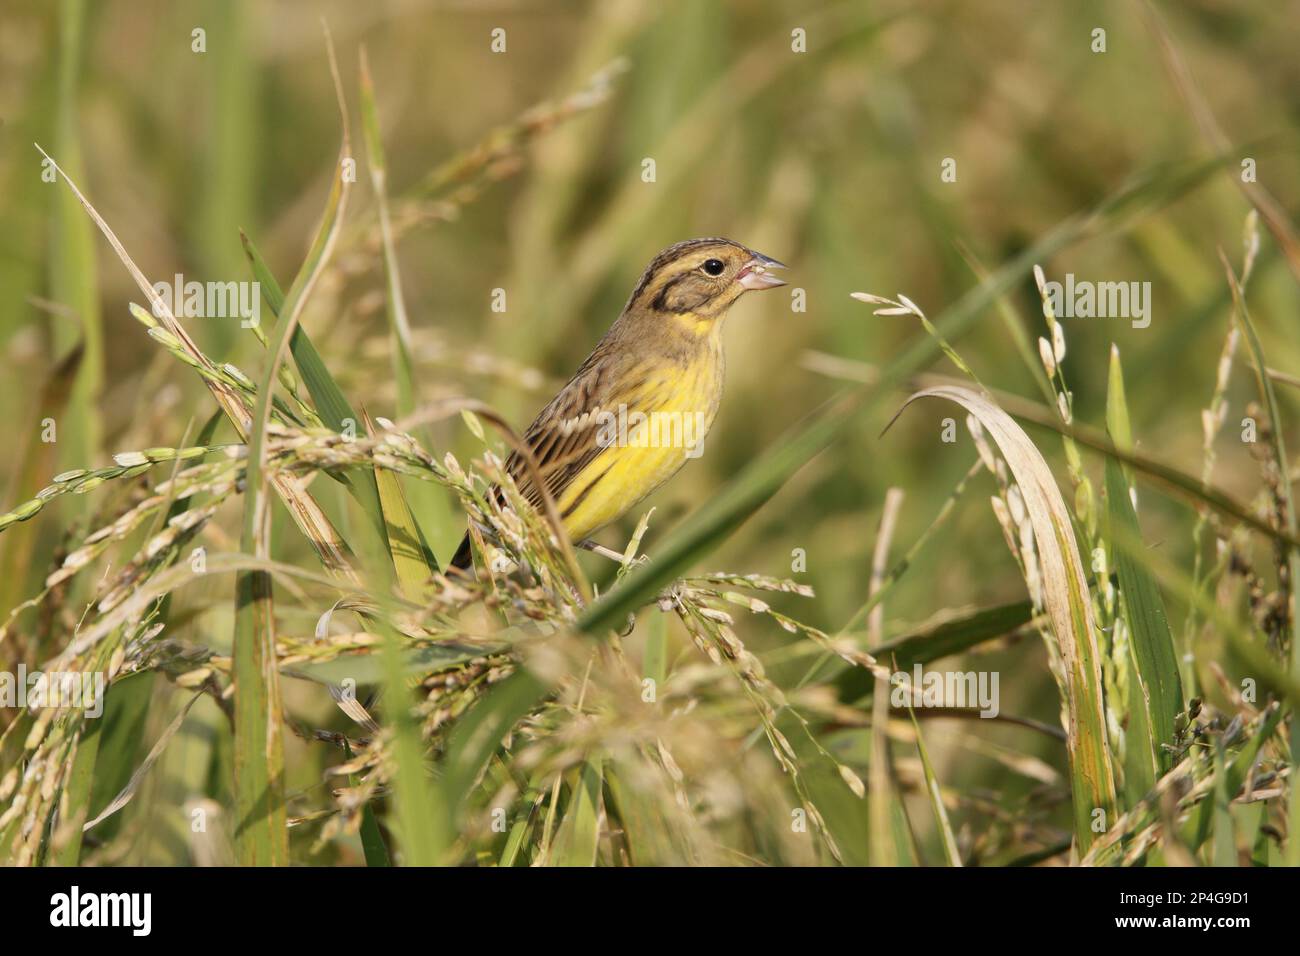 Yellow-breasted Bunting (Emberiza aureola) adult, non-breeding plumage, feeding on rice grain, perched on rice stem, Long Valley, New Territories Stock Photo